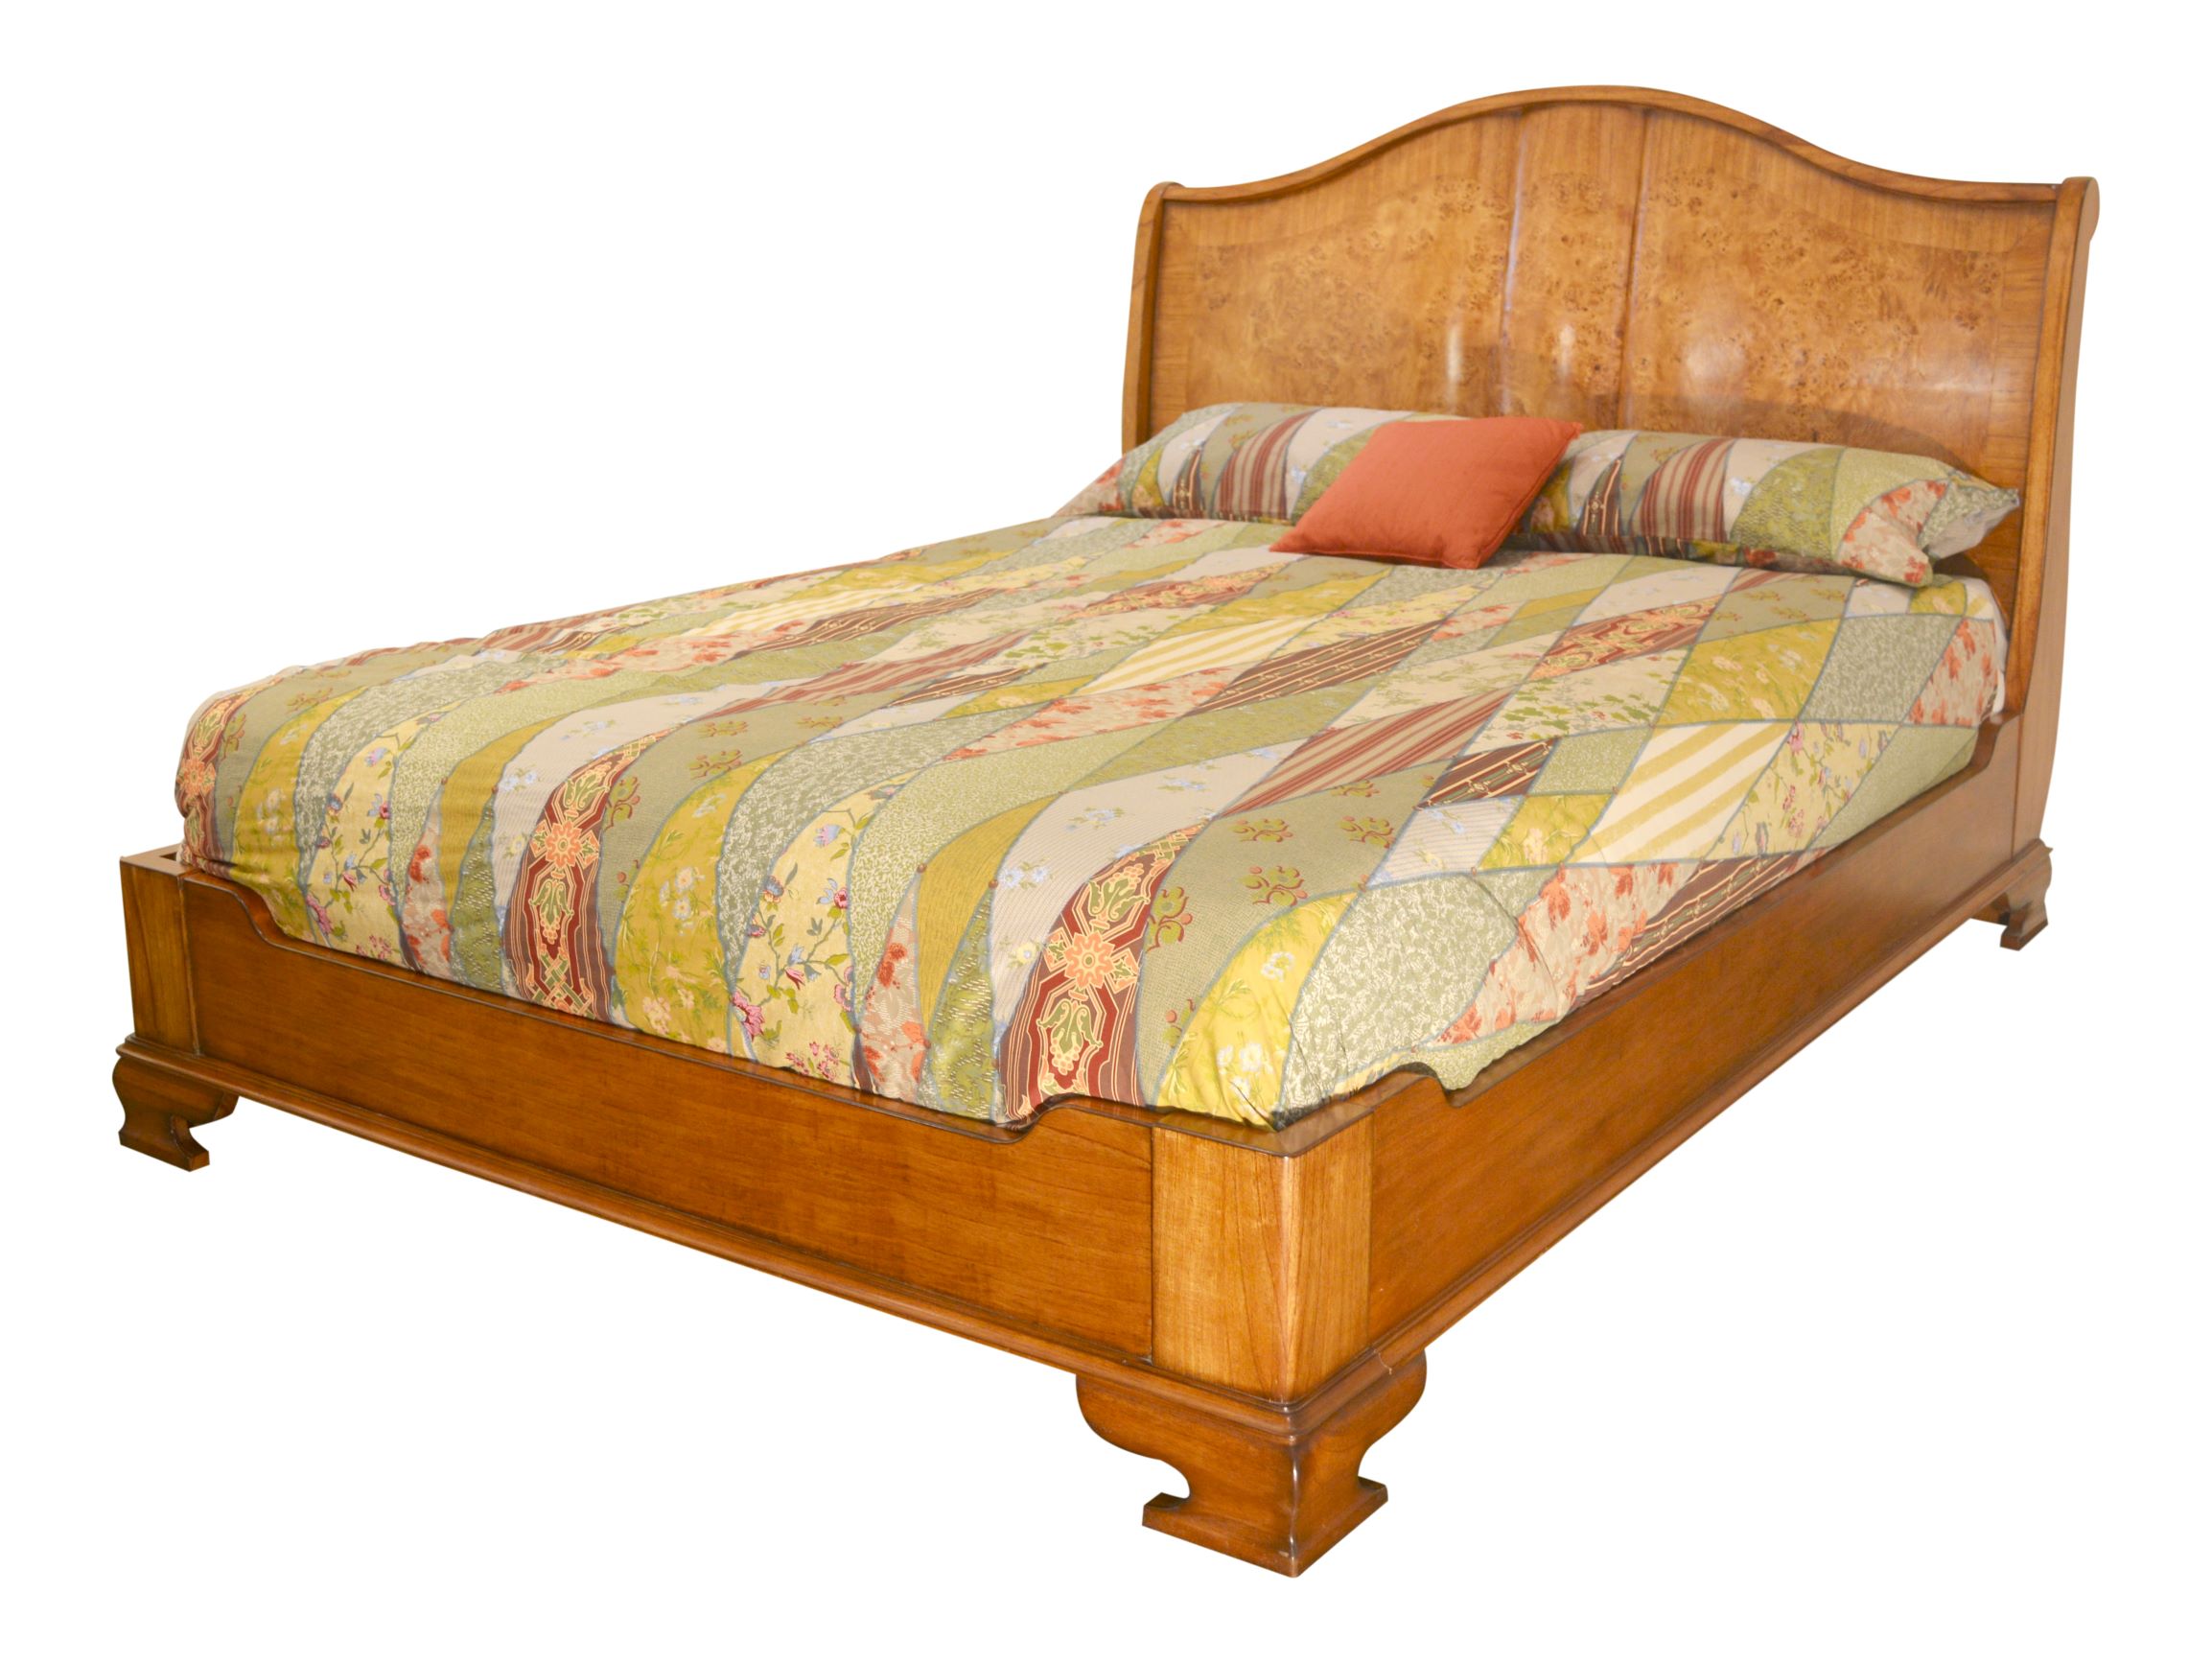 Hampton Walnut Sleigh Bed With Low, Cherry Wood Sleigh Bed Super King